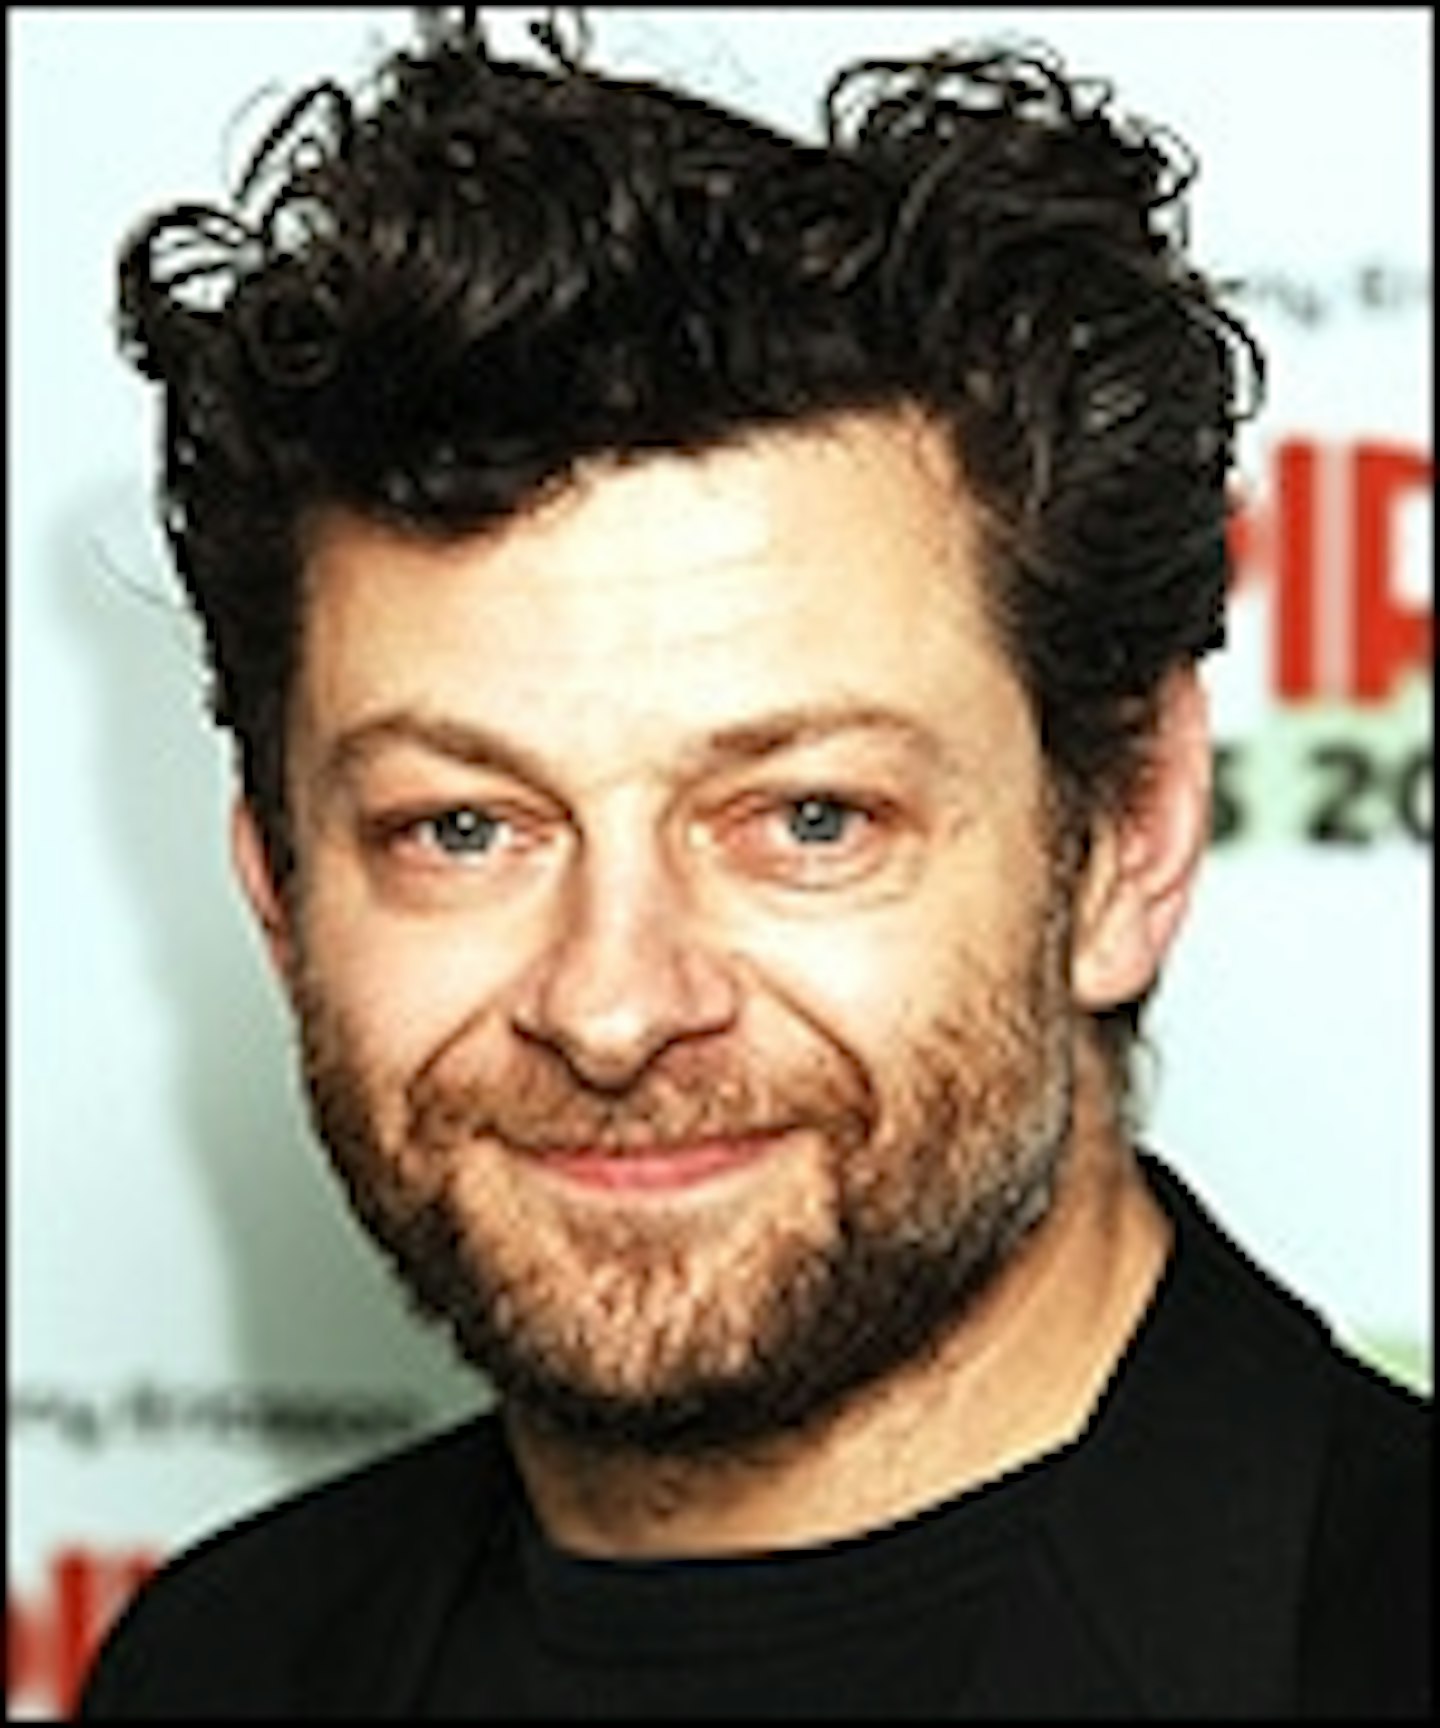 Andy Serkis Joins Rise of the Apes